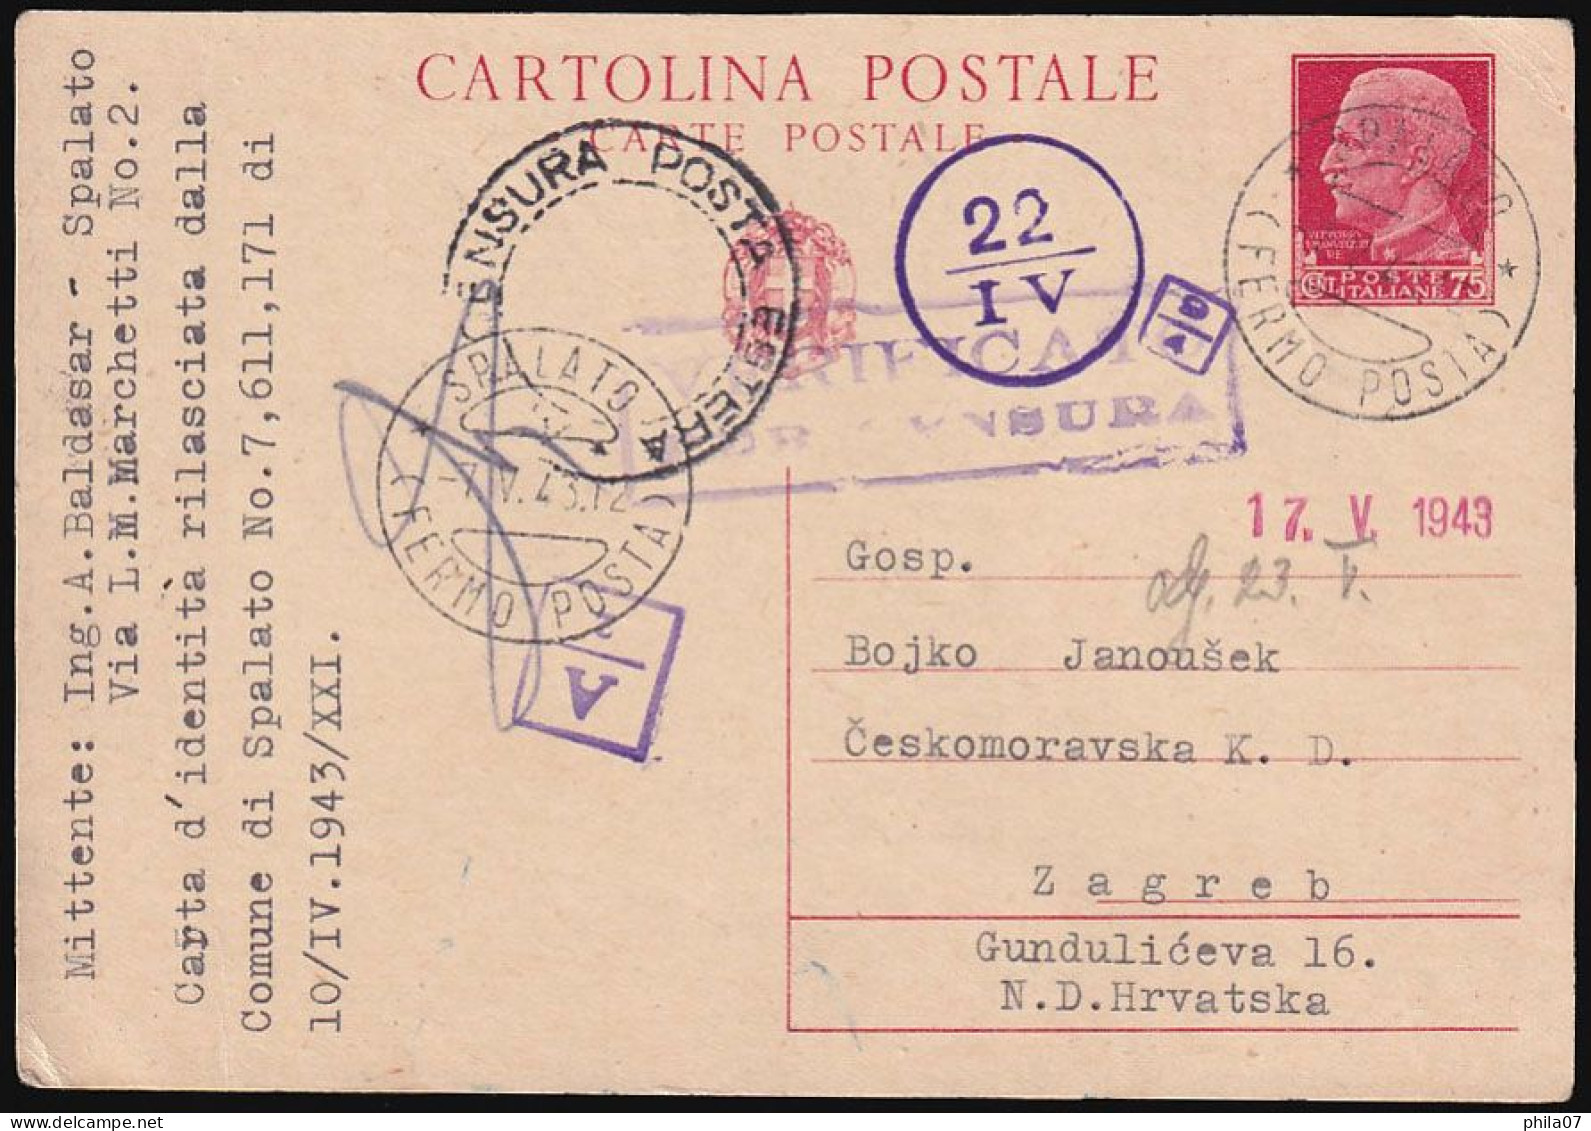 CROATIA (NDH) WWII - Stationery Sent From Split To Zagreb 07.05. 1943. Censored With The Italian Censorship / 2 Scans - Fiume & Kupa